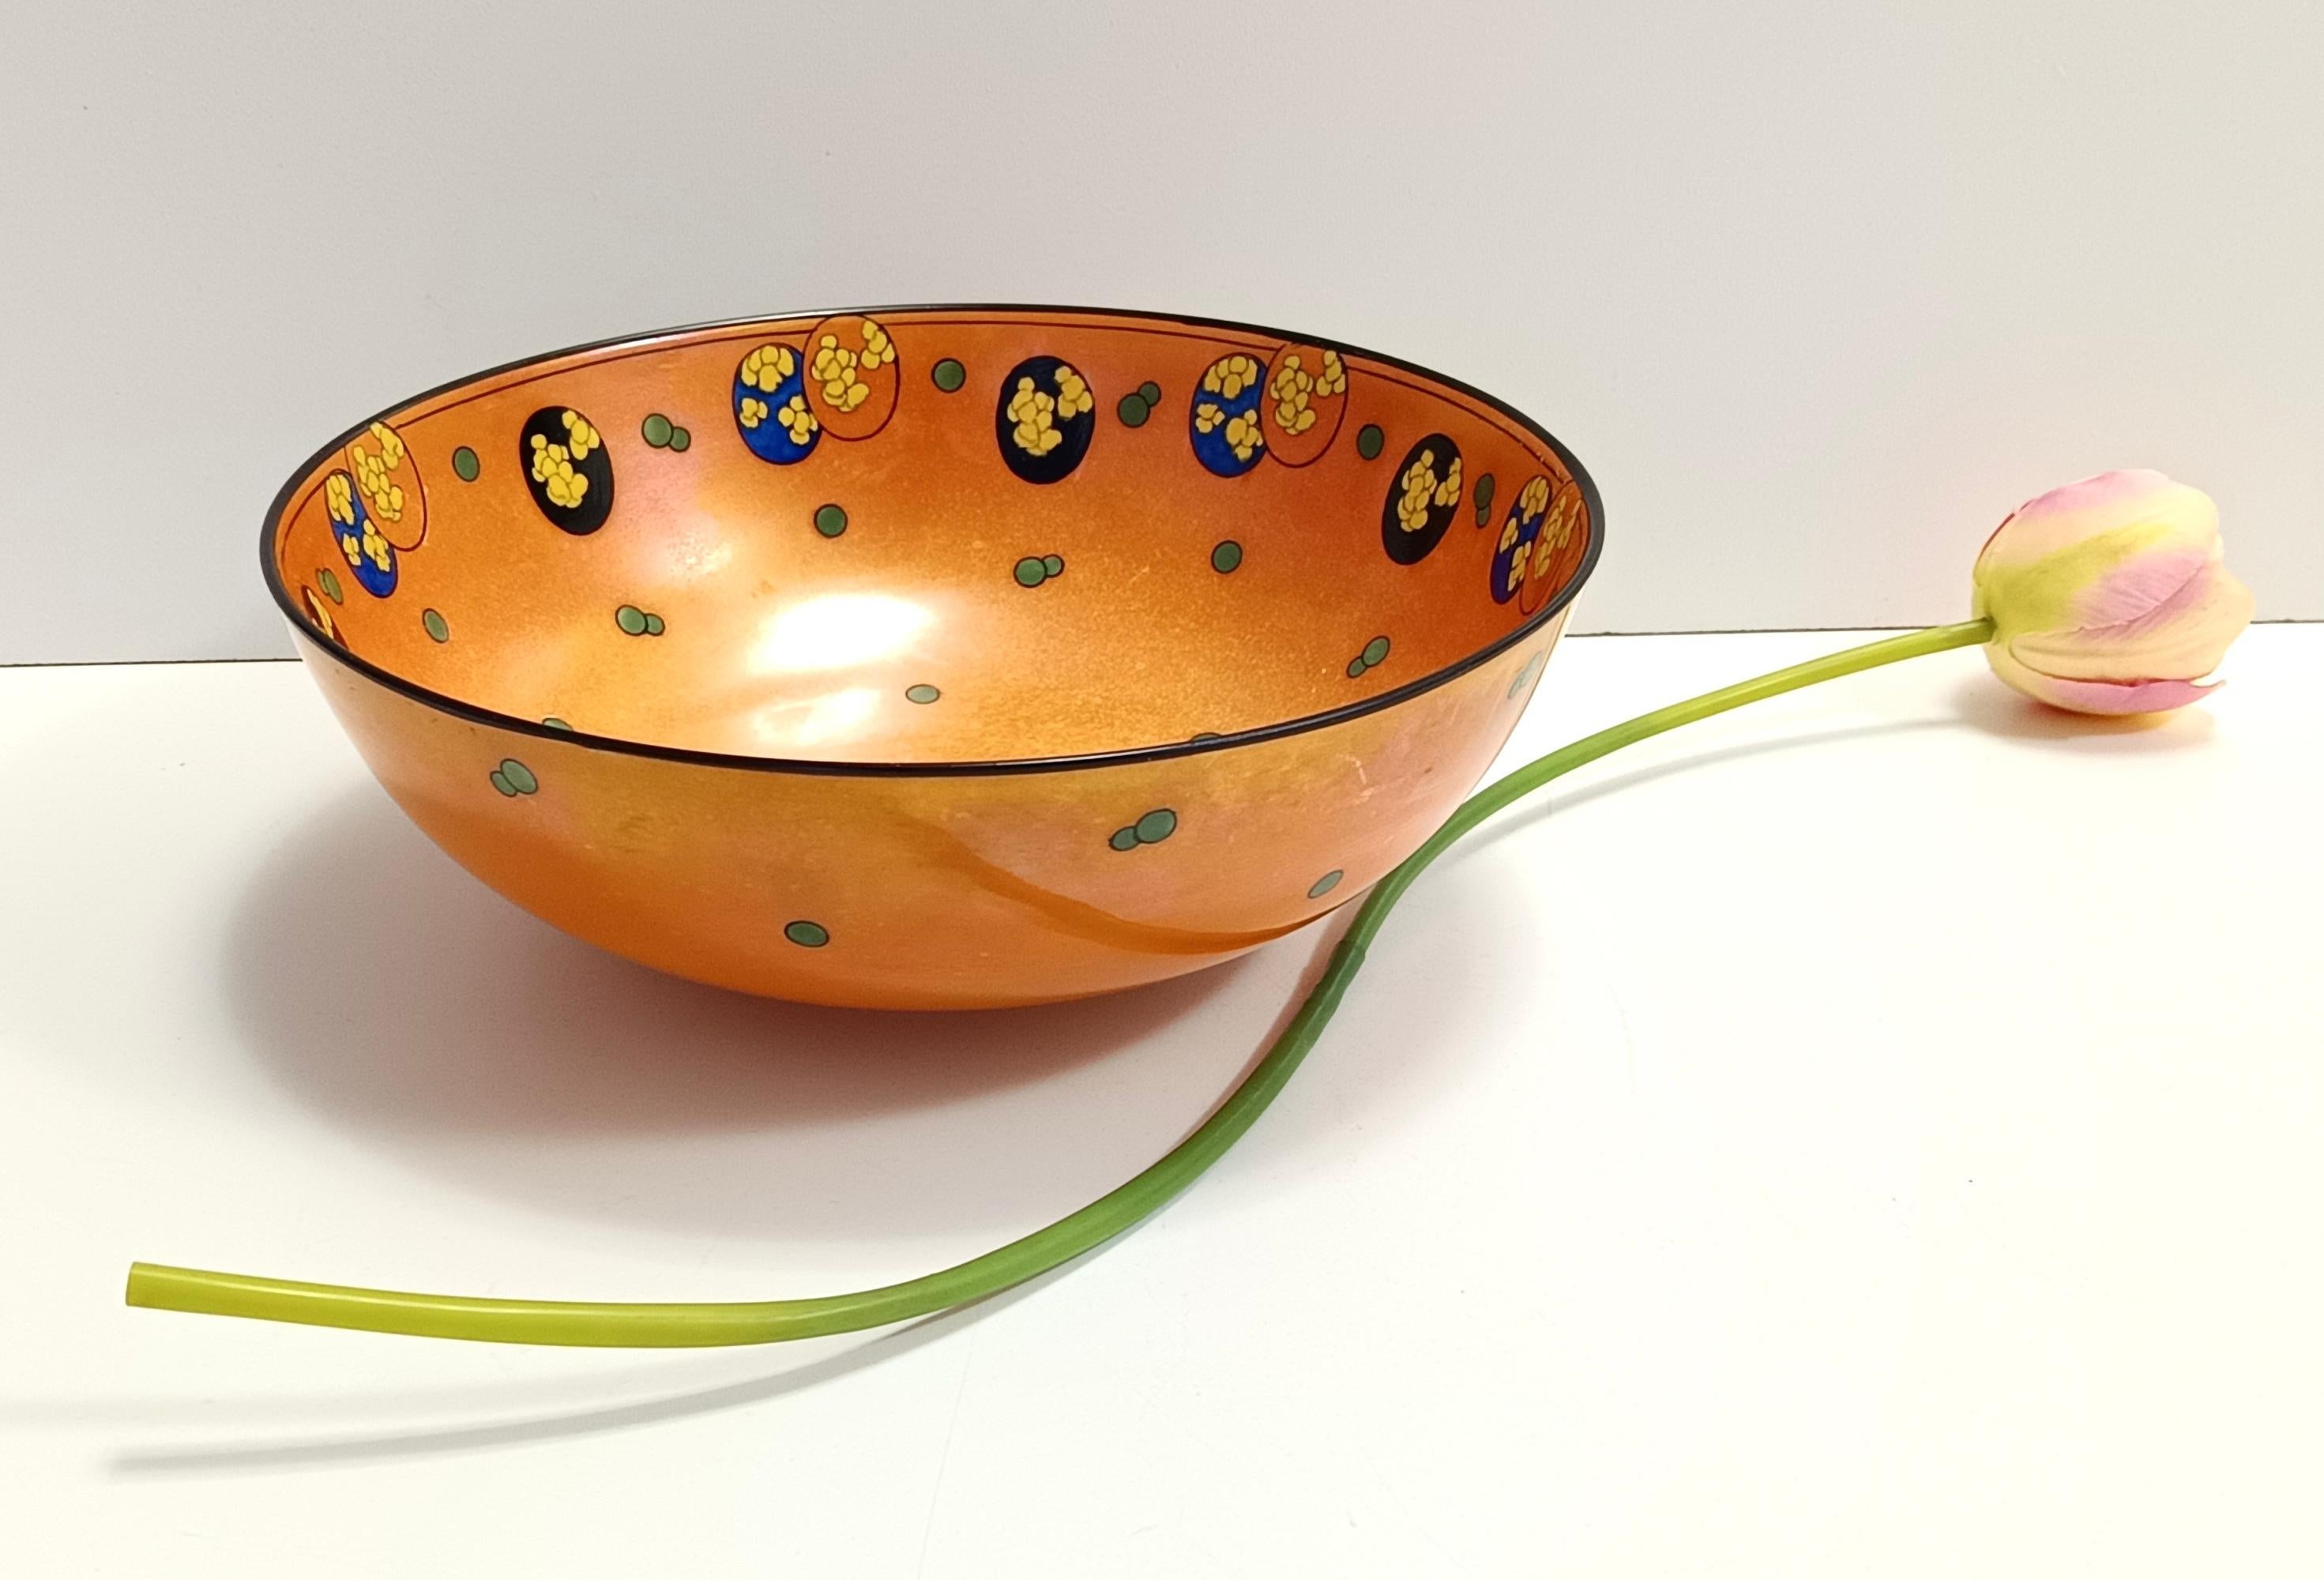 Made in England in 1920s.
It is made in orange iridescent lacquered porcelain with decorations. 
This bowl - vide poche is vintage, therefore it might show slight traces of use, but it can be considered as in excellent original condition. 
It is